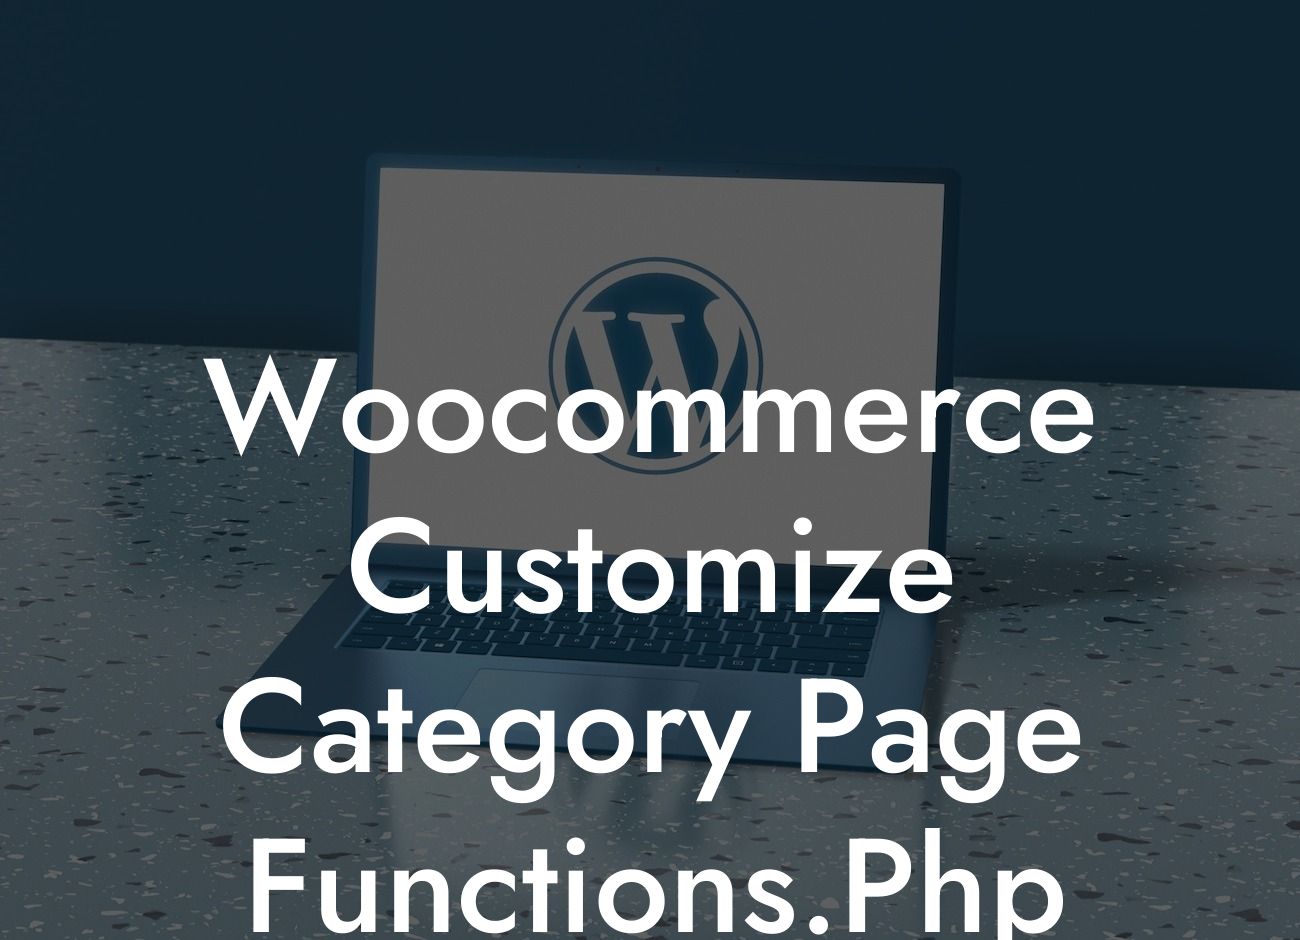 Woocommerce Customize Category Page Functions.Php